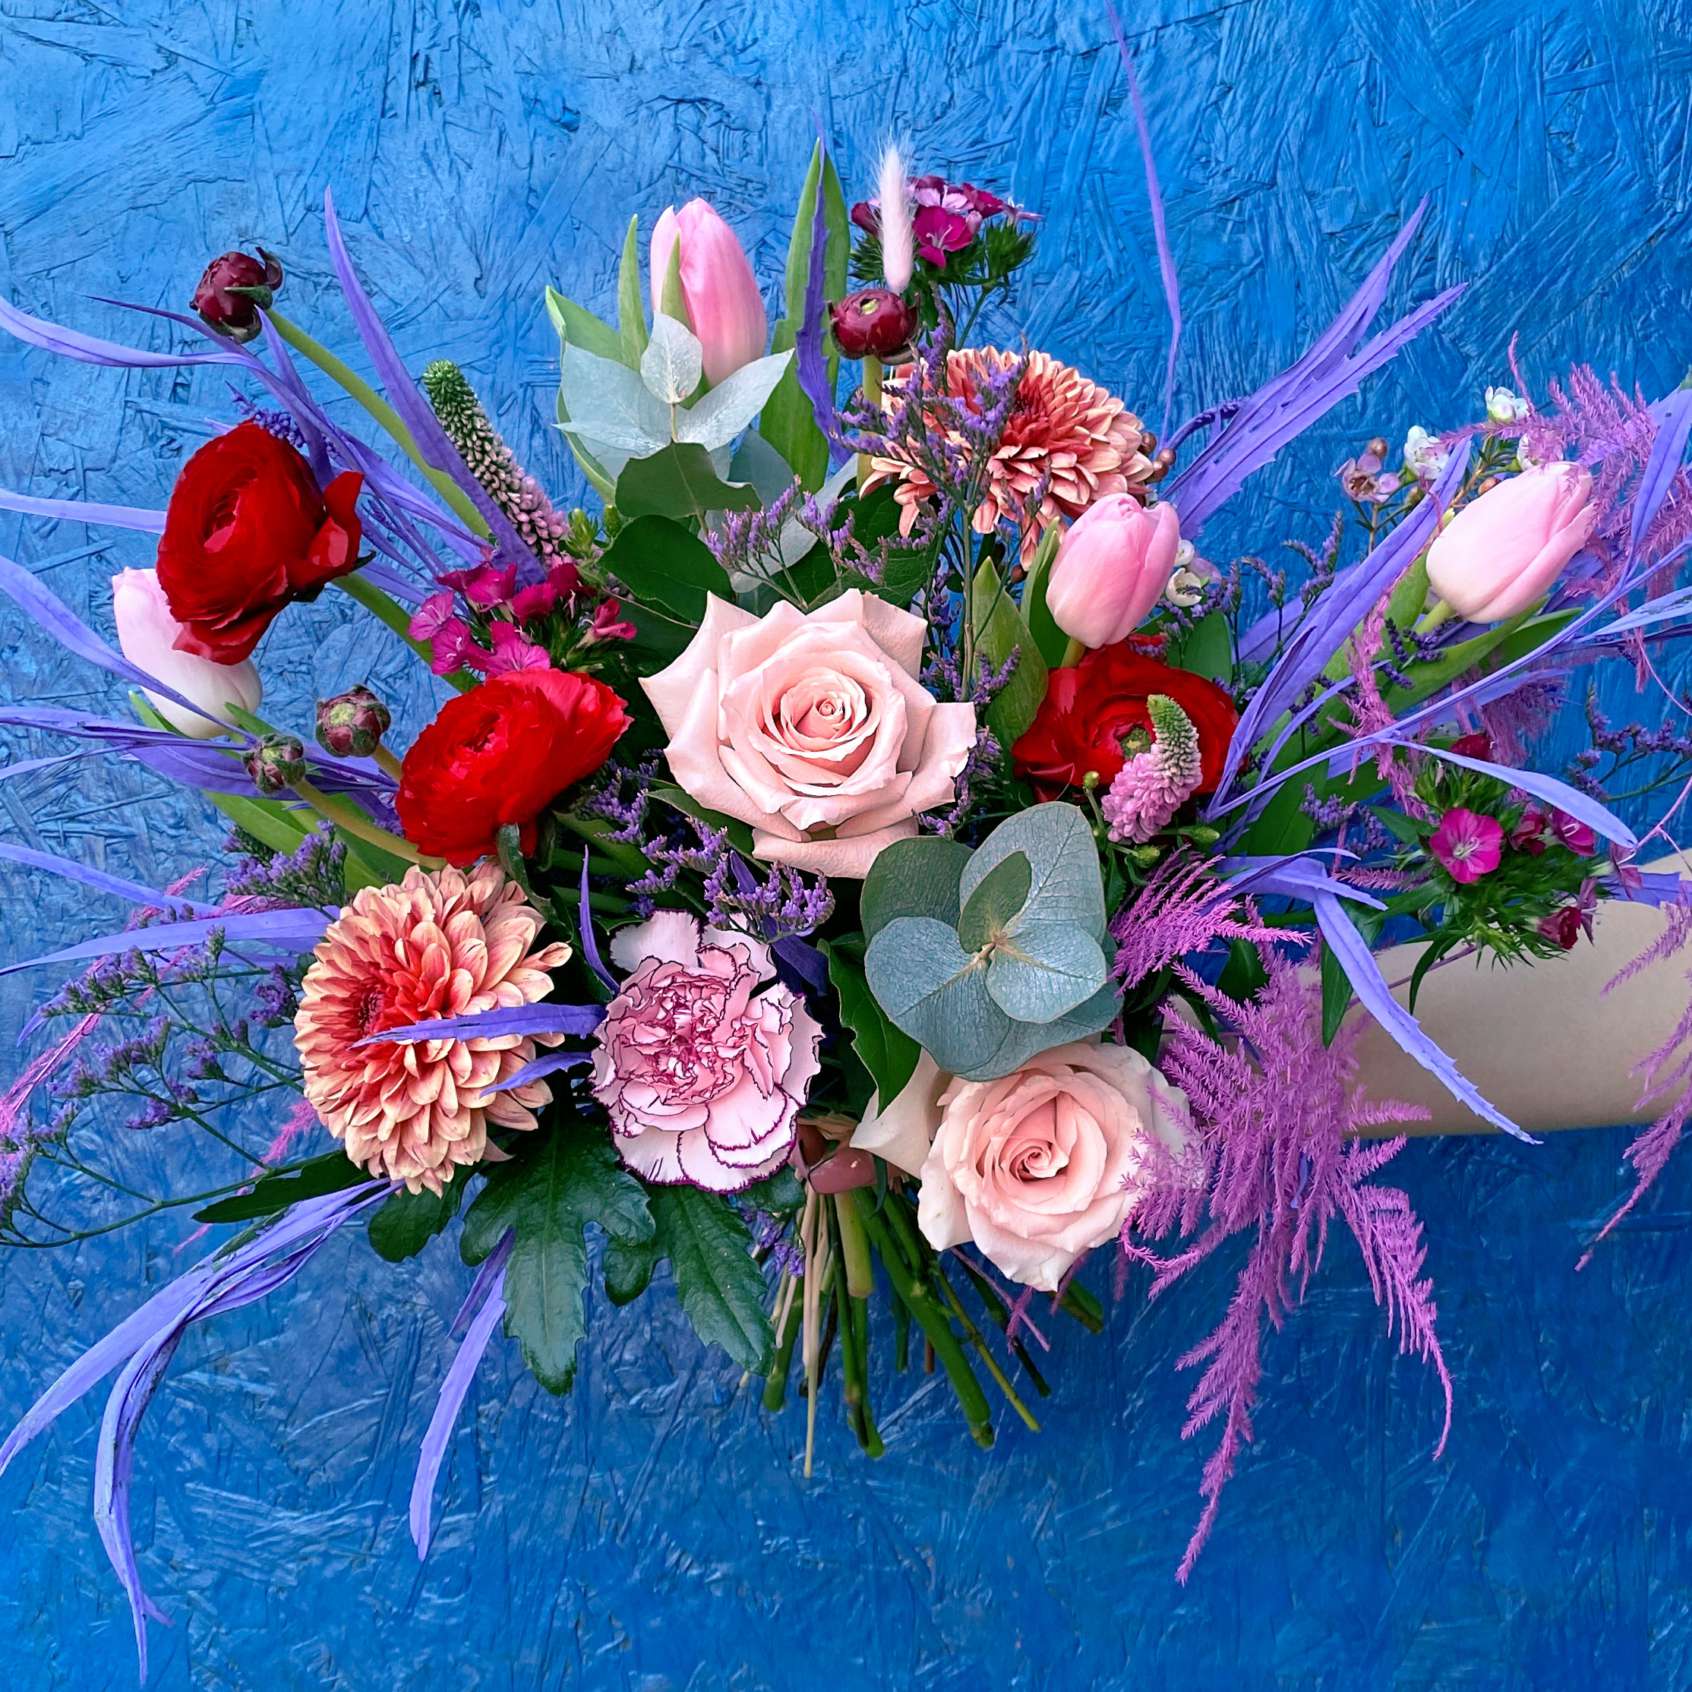 Pink, reds ranunculus, roses, tulips and eucalyptus - Valentine's flowers